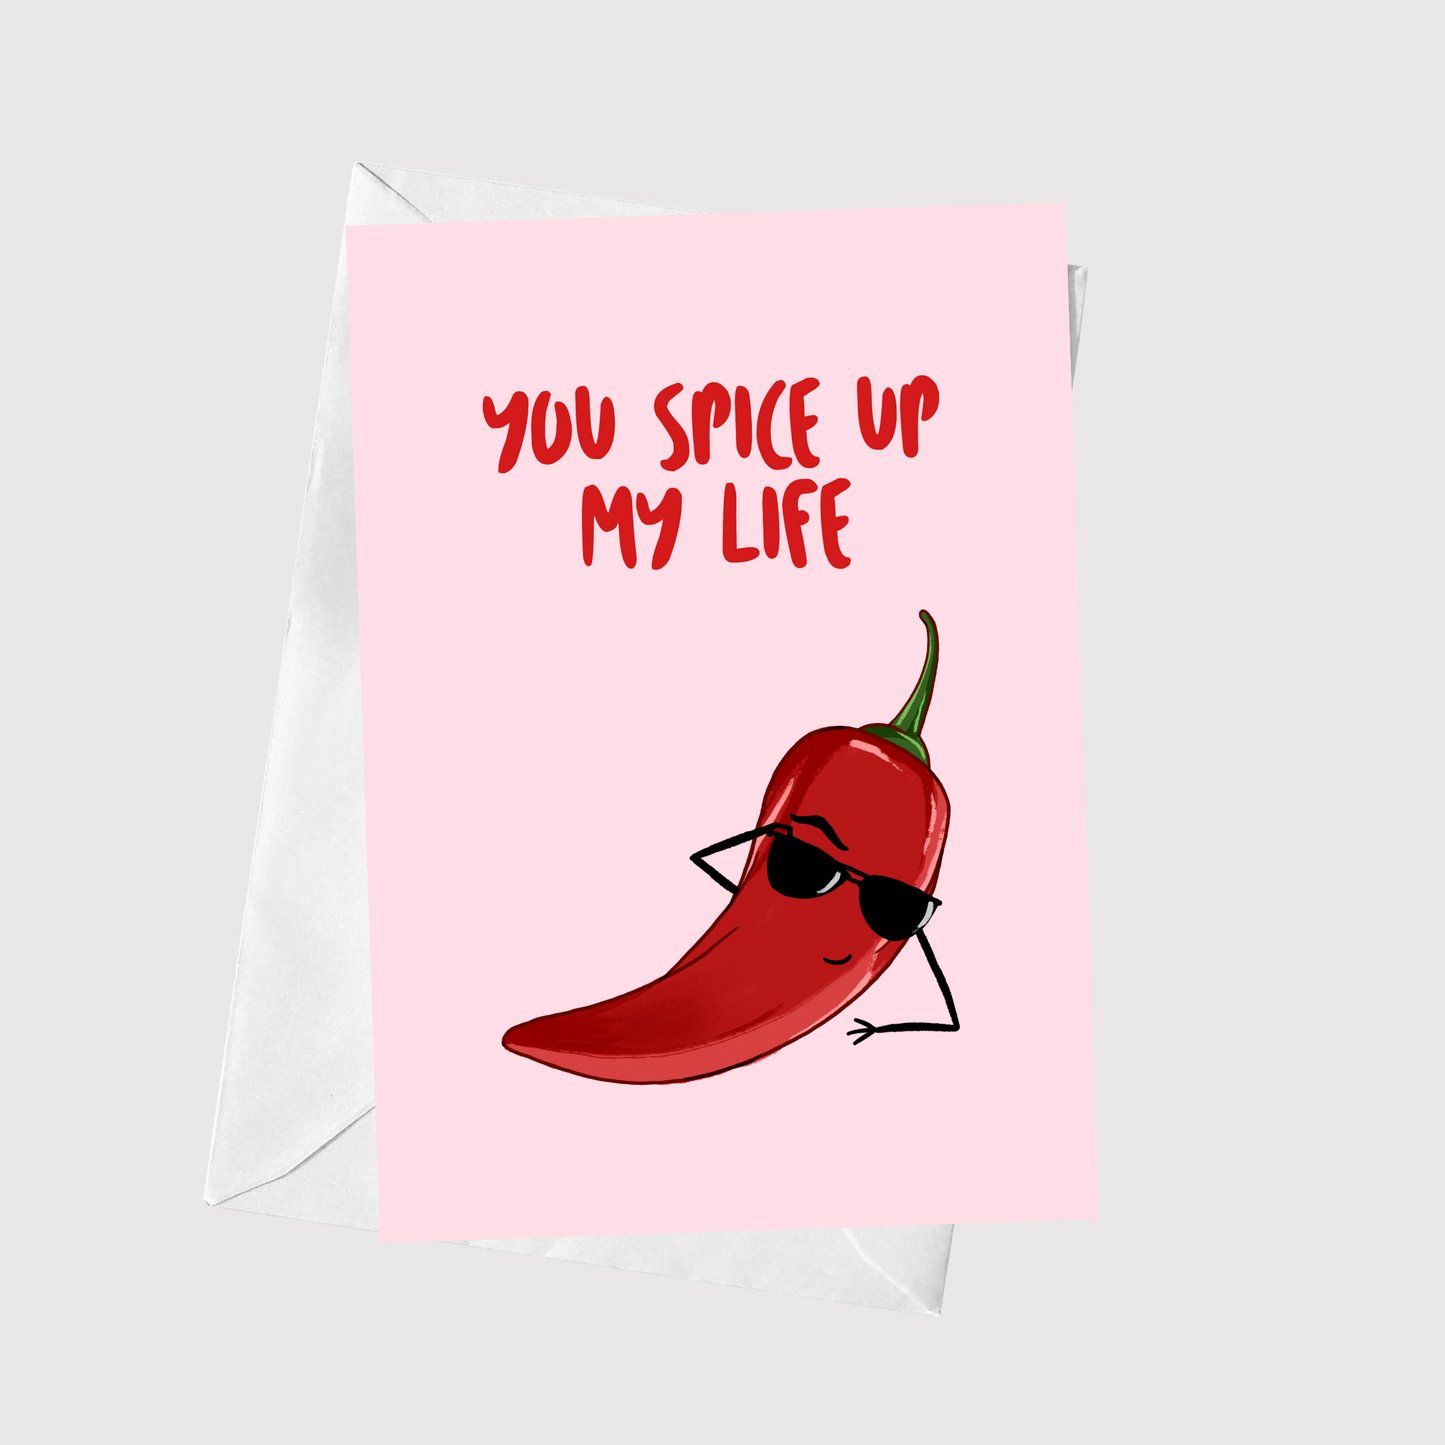 You Spice Up My Life